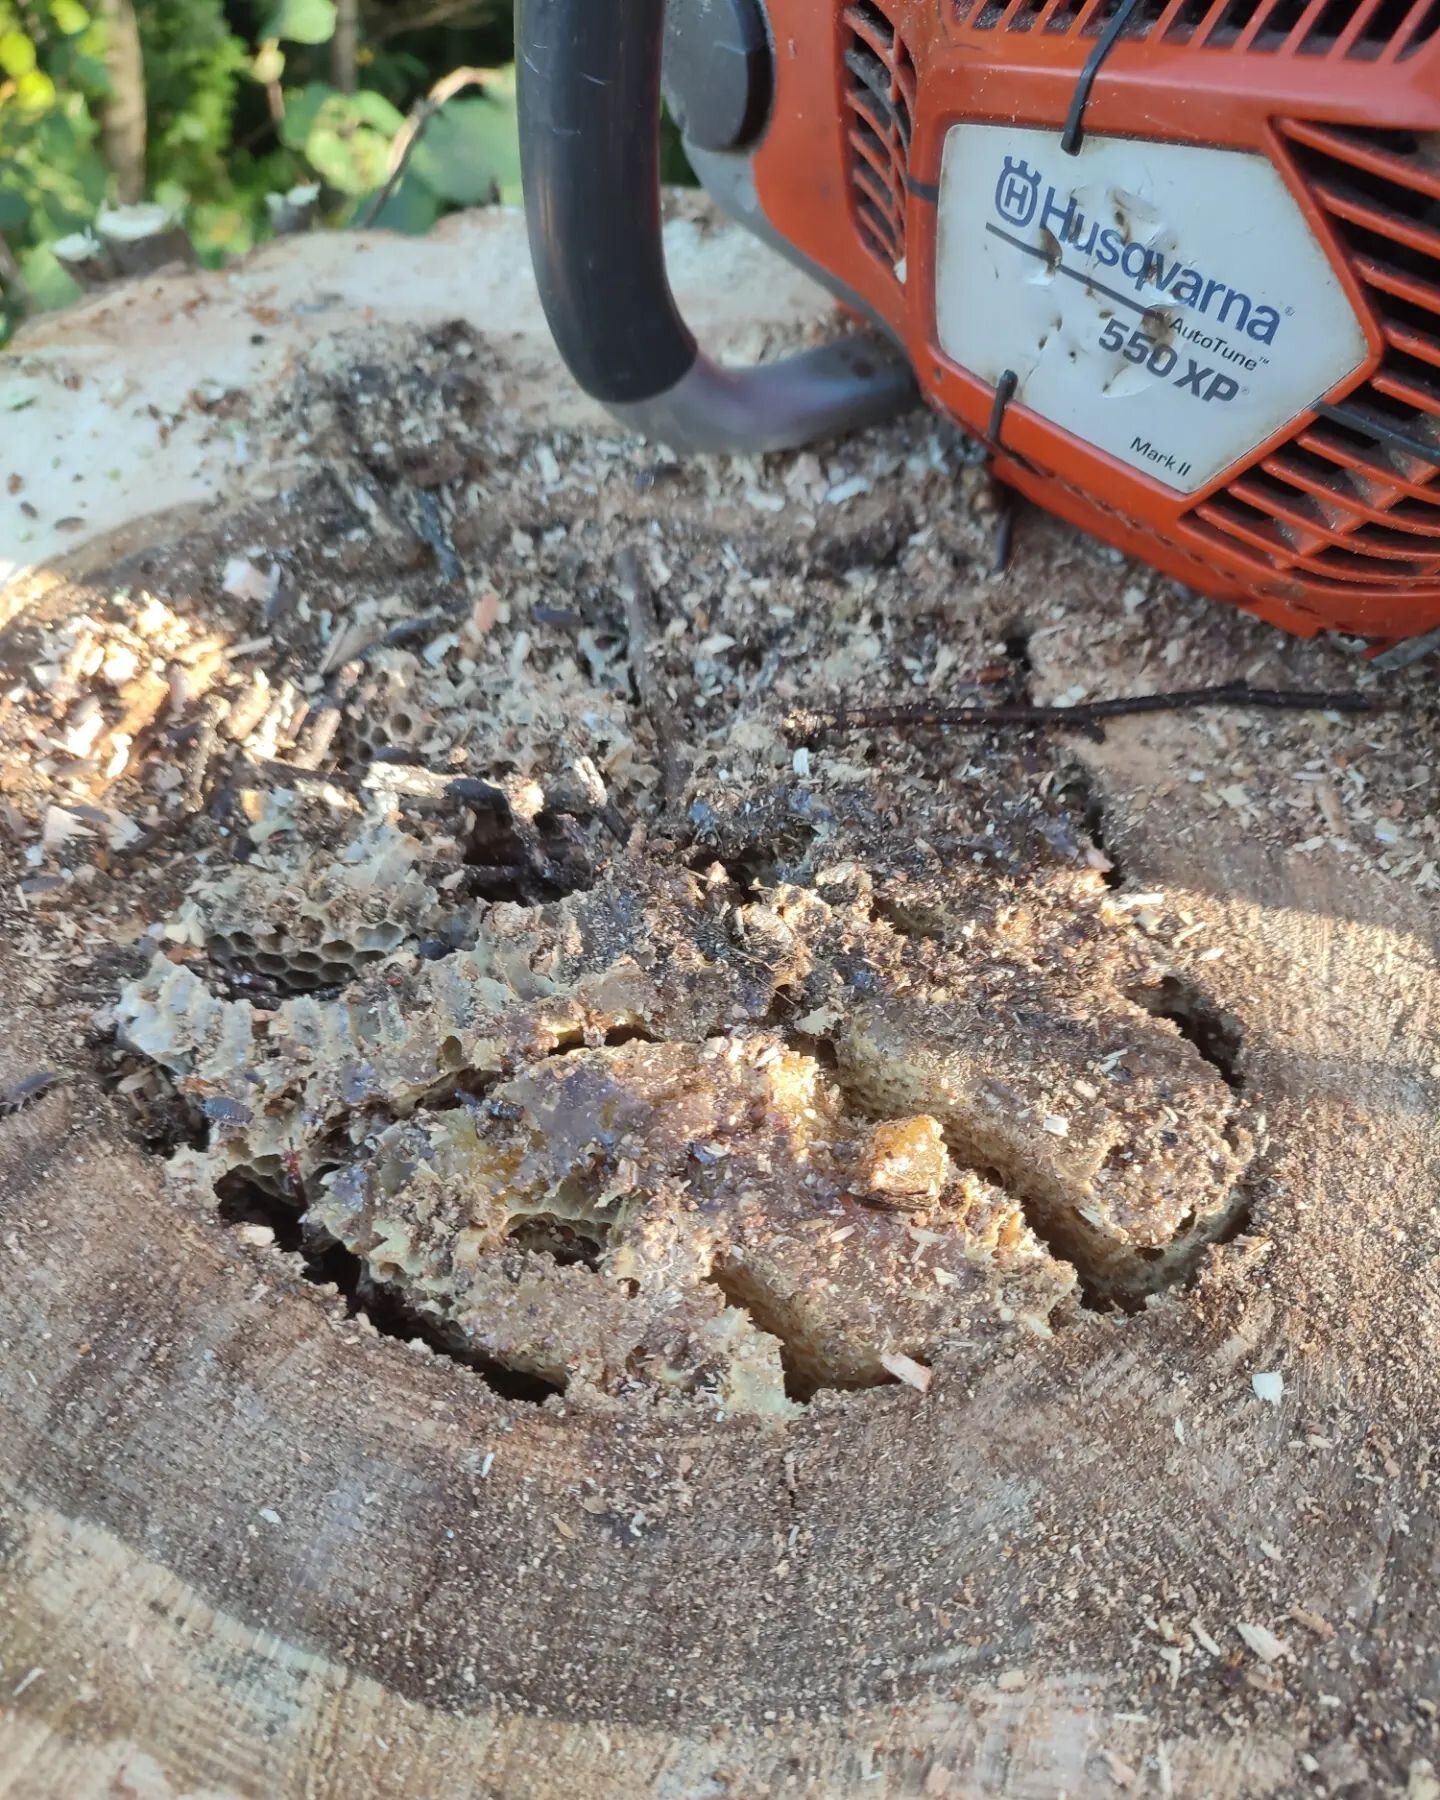 After topping out an ash tree I discovered the stem was hollow and full of honey comb! Oops. I evacuated the tree sharpish as the bees swarmed out. We contacted a local bee keeper for advice and he lent me a suit and said to nail a roof onto the mono